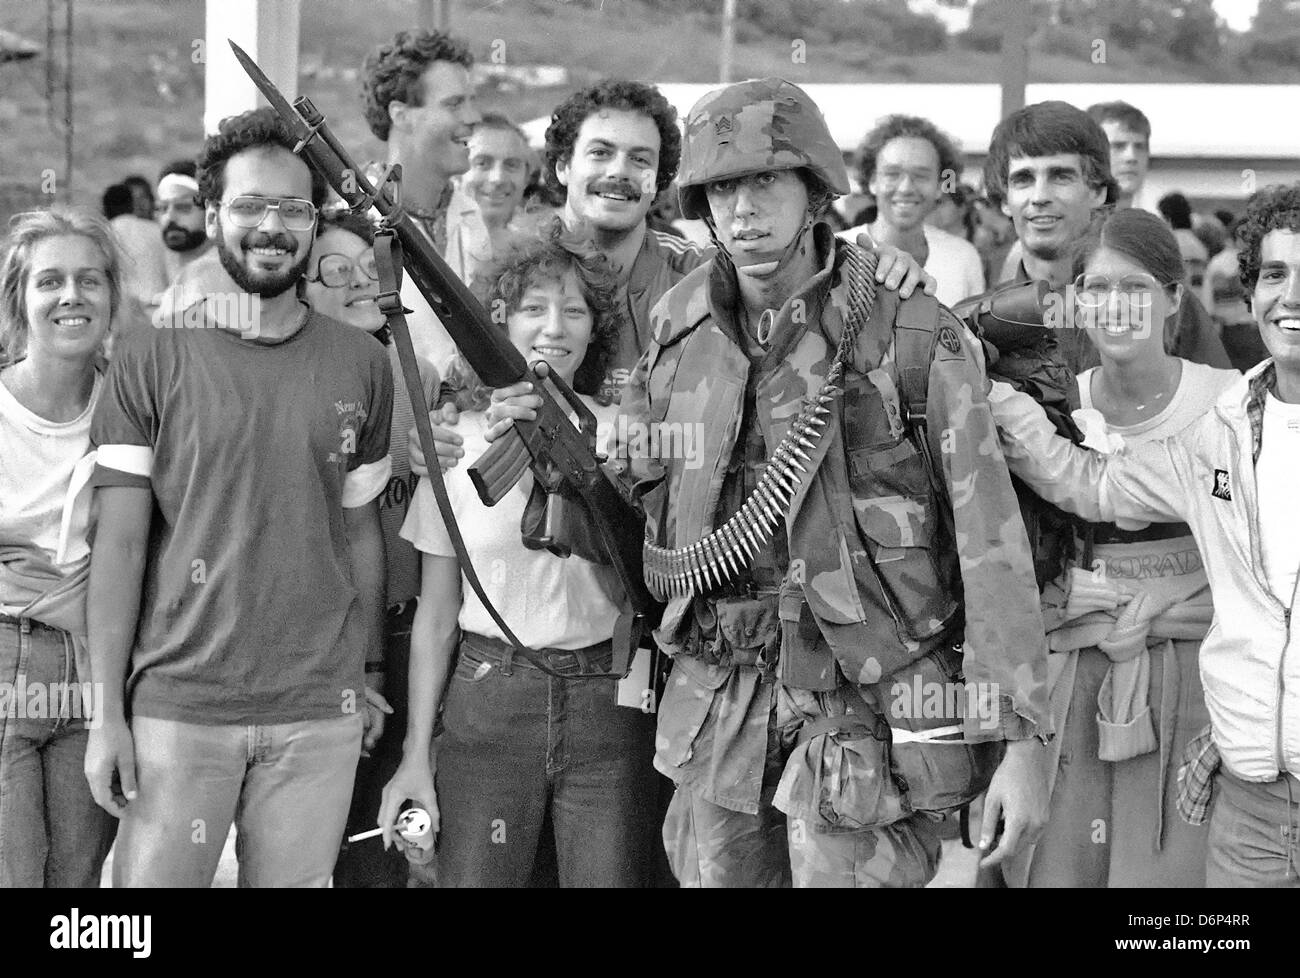 US medical students from the St. Georges Medical University celebrate their liberation following the Invasion of Grenada, codenamed Operation Urgent Fury Onvember 26, 1983 in St Georges, Grenada. The invasion began on October 25, 1983 and was the first major military action by the United States since the end of the Vietnam War. Stock Photo